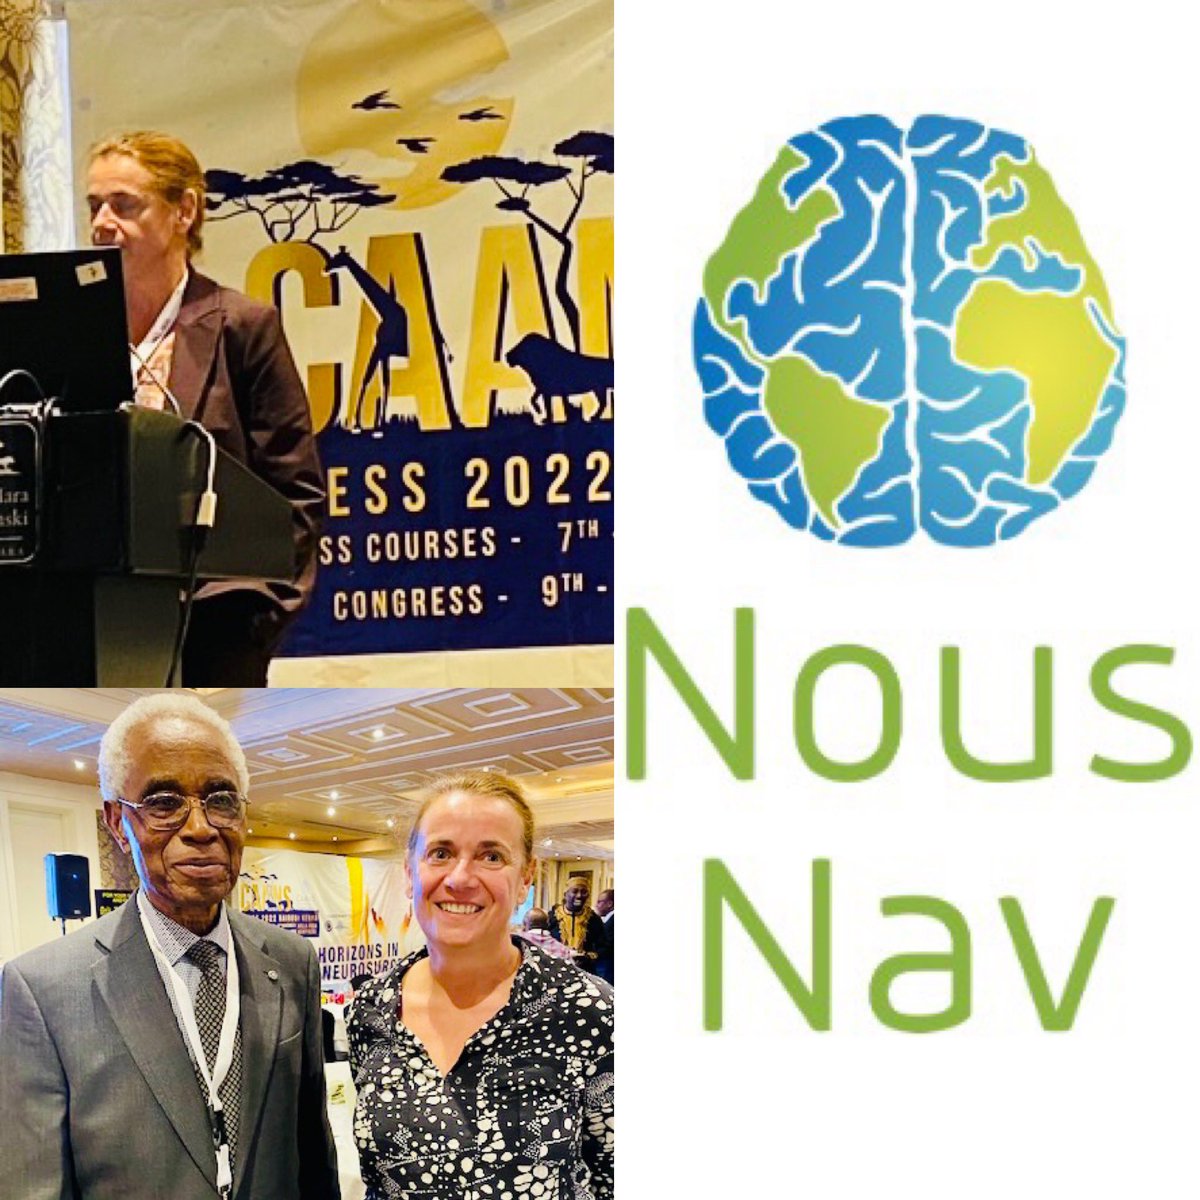 Kudos to Dr. Alexandra Golby in bringing accessible low-cost neuronavigation #NousNav to #globalneurosurgery! Way to go in igniting young minds, creativity, and local resources to improve patient care in #neurosurgery. @GolbyLab @BWHNeurosurgery @harvardmed @EAChiocca @grosseaumd